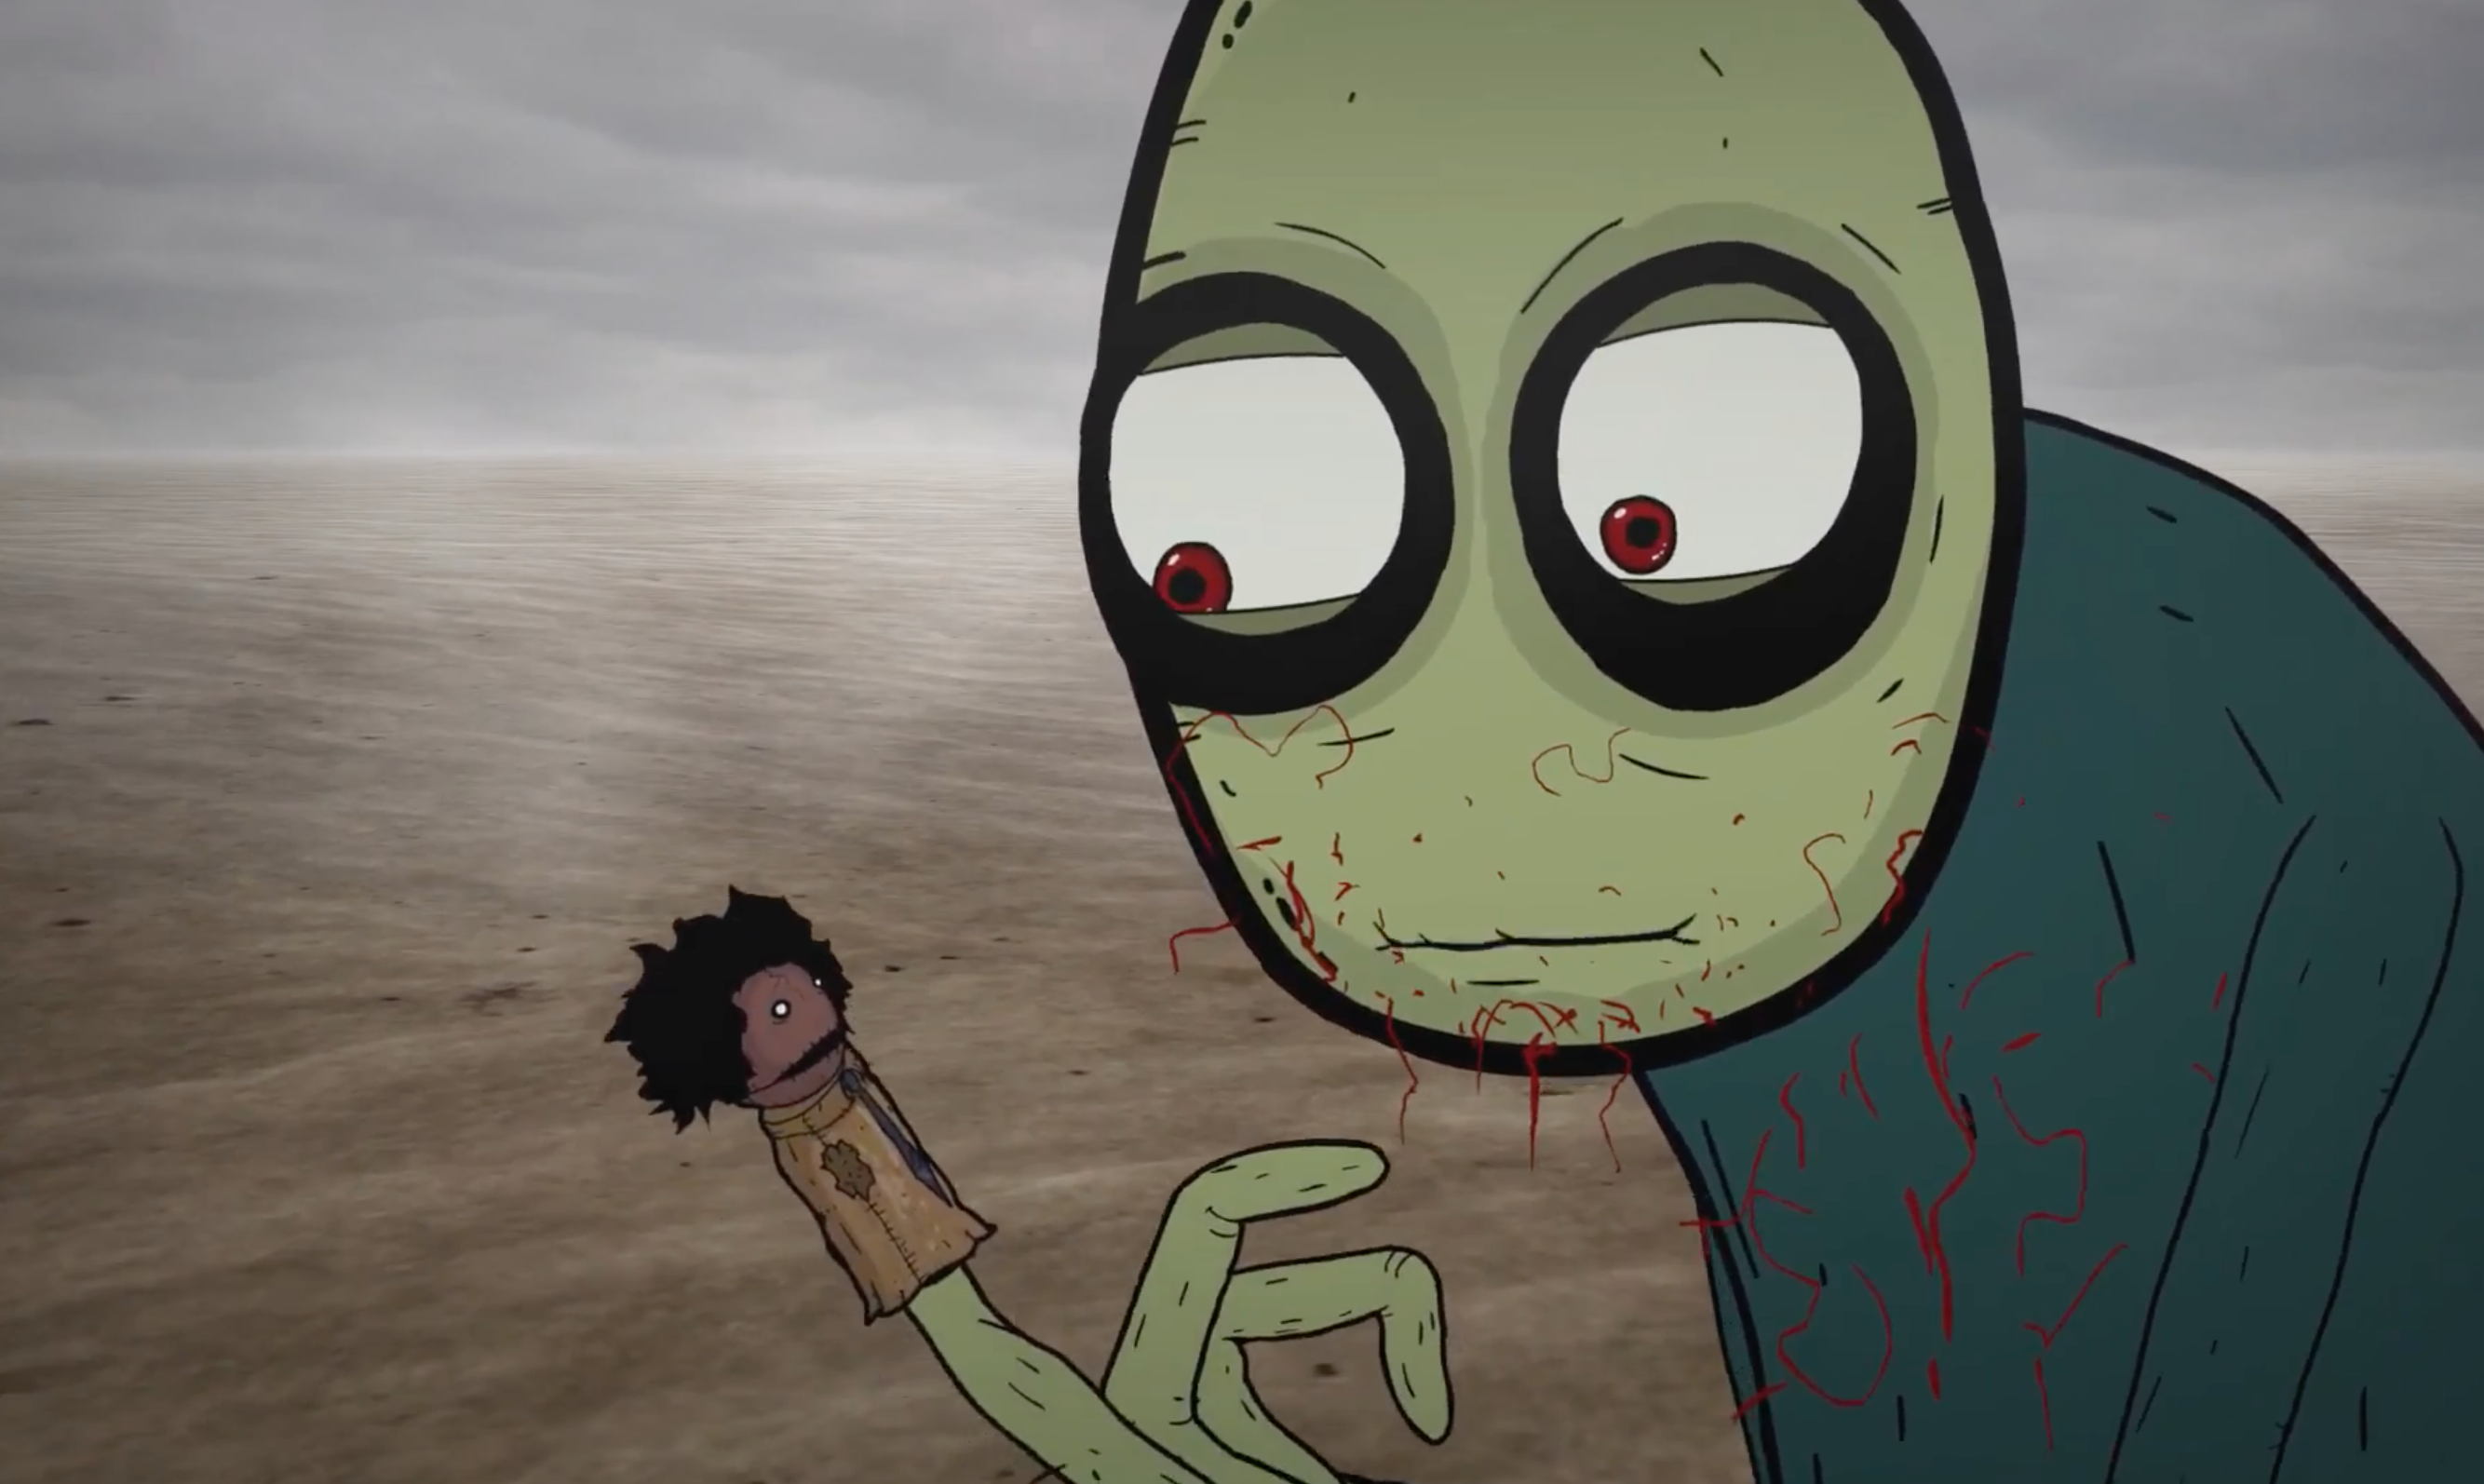 There's a brand new Salad Fingers cartoon and it is as disturbing as ever